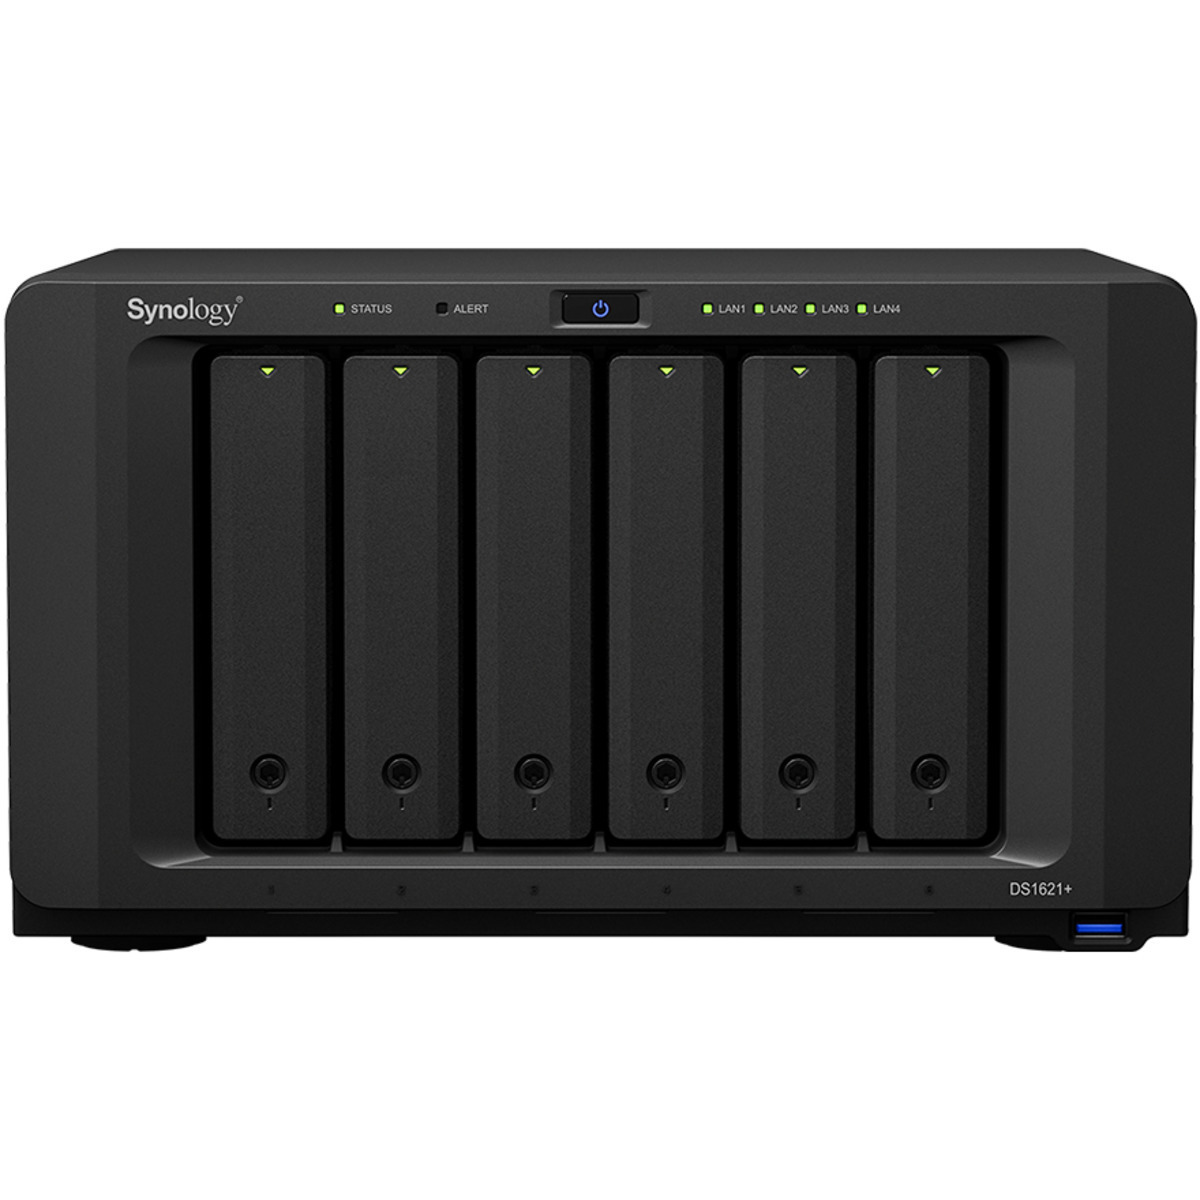 Synology DiskStation DS1621+ 15.3tb 6-Bay Desktop Multimedia / Power User / Business NAS - Network Attached Storage Device 4x3.8tb Synology SAT5210 Series SAT5210-3840G 2.5 530/500MB/s SATA 6Gb/s SSD ENTERPRISE Class Drives Installed - Burn-In Tested - FREE RAM UPGRADE DiskStation DS1621+